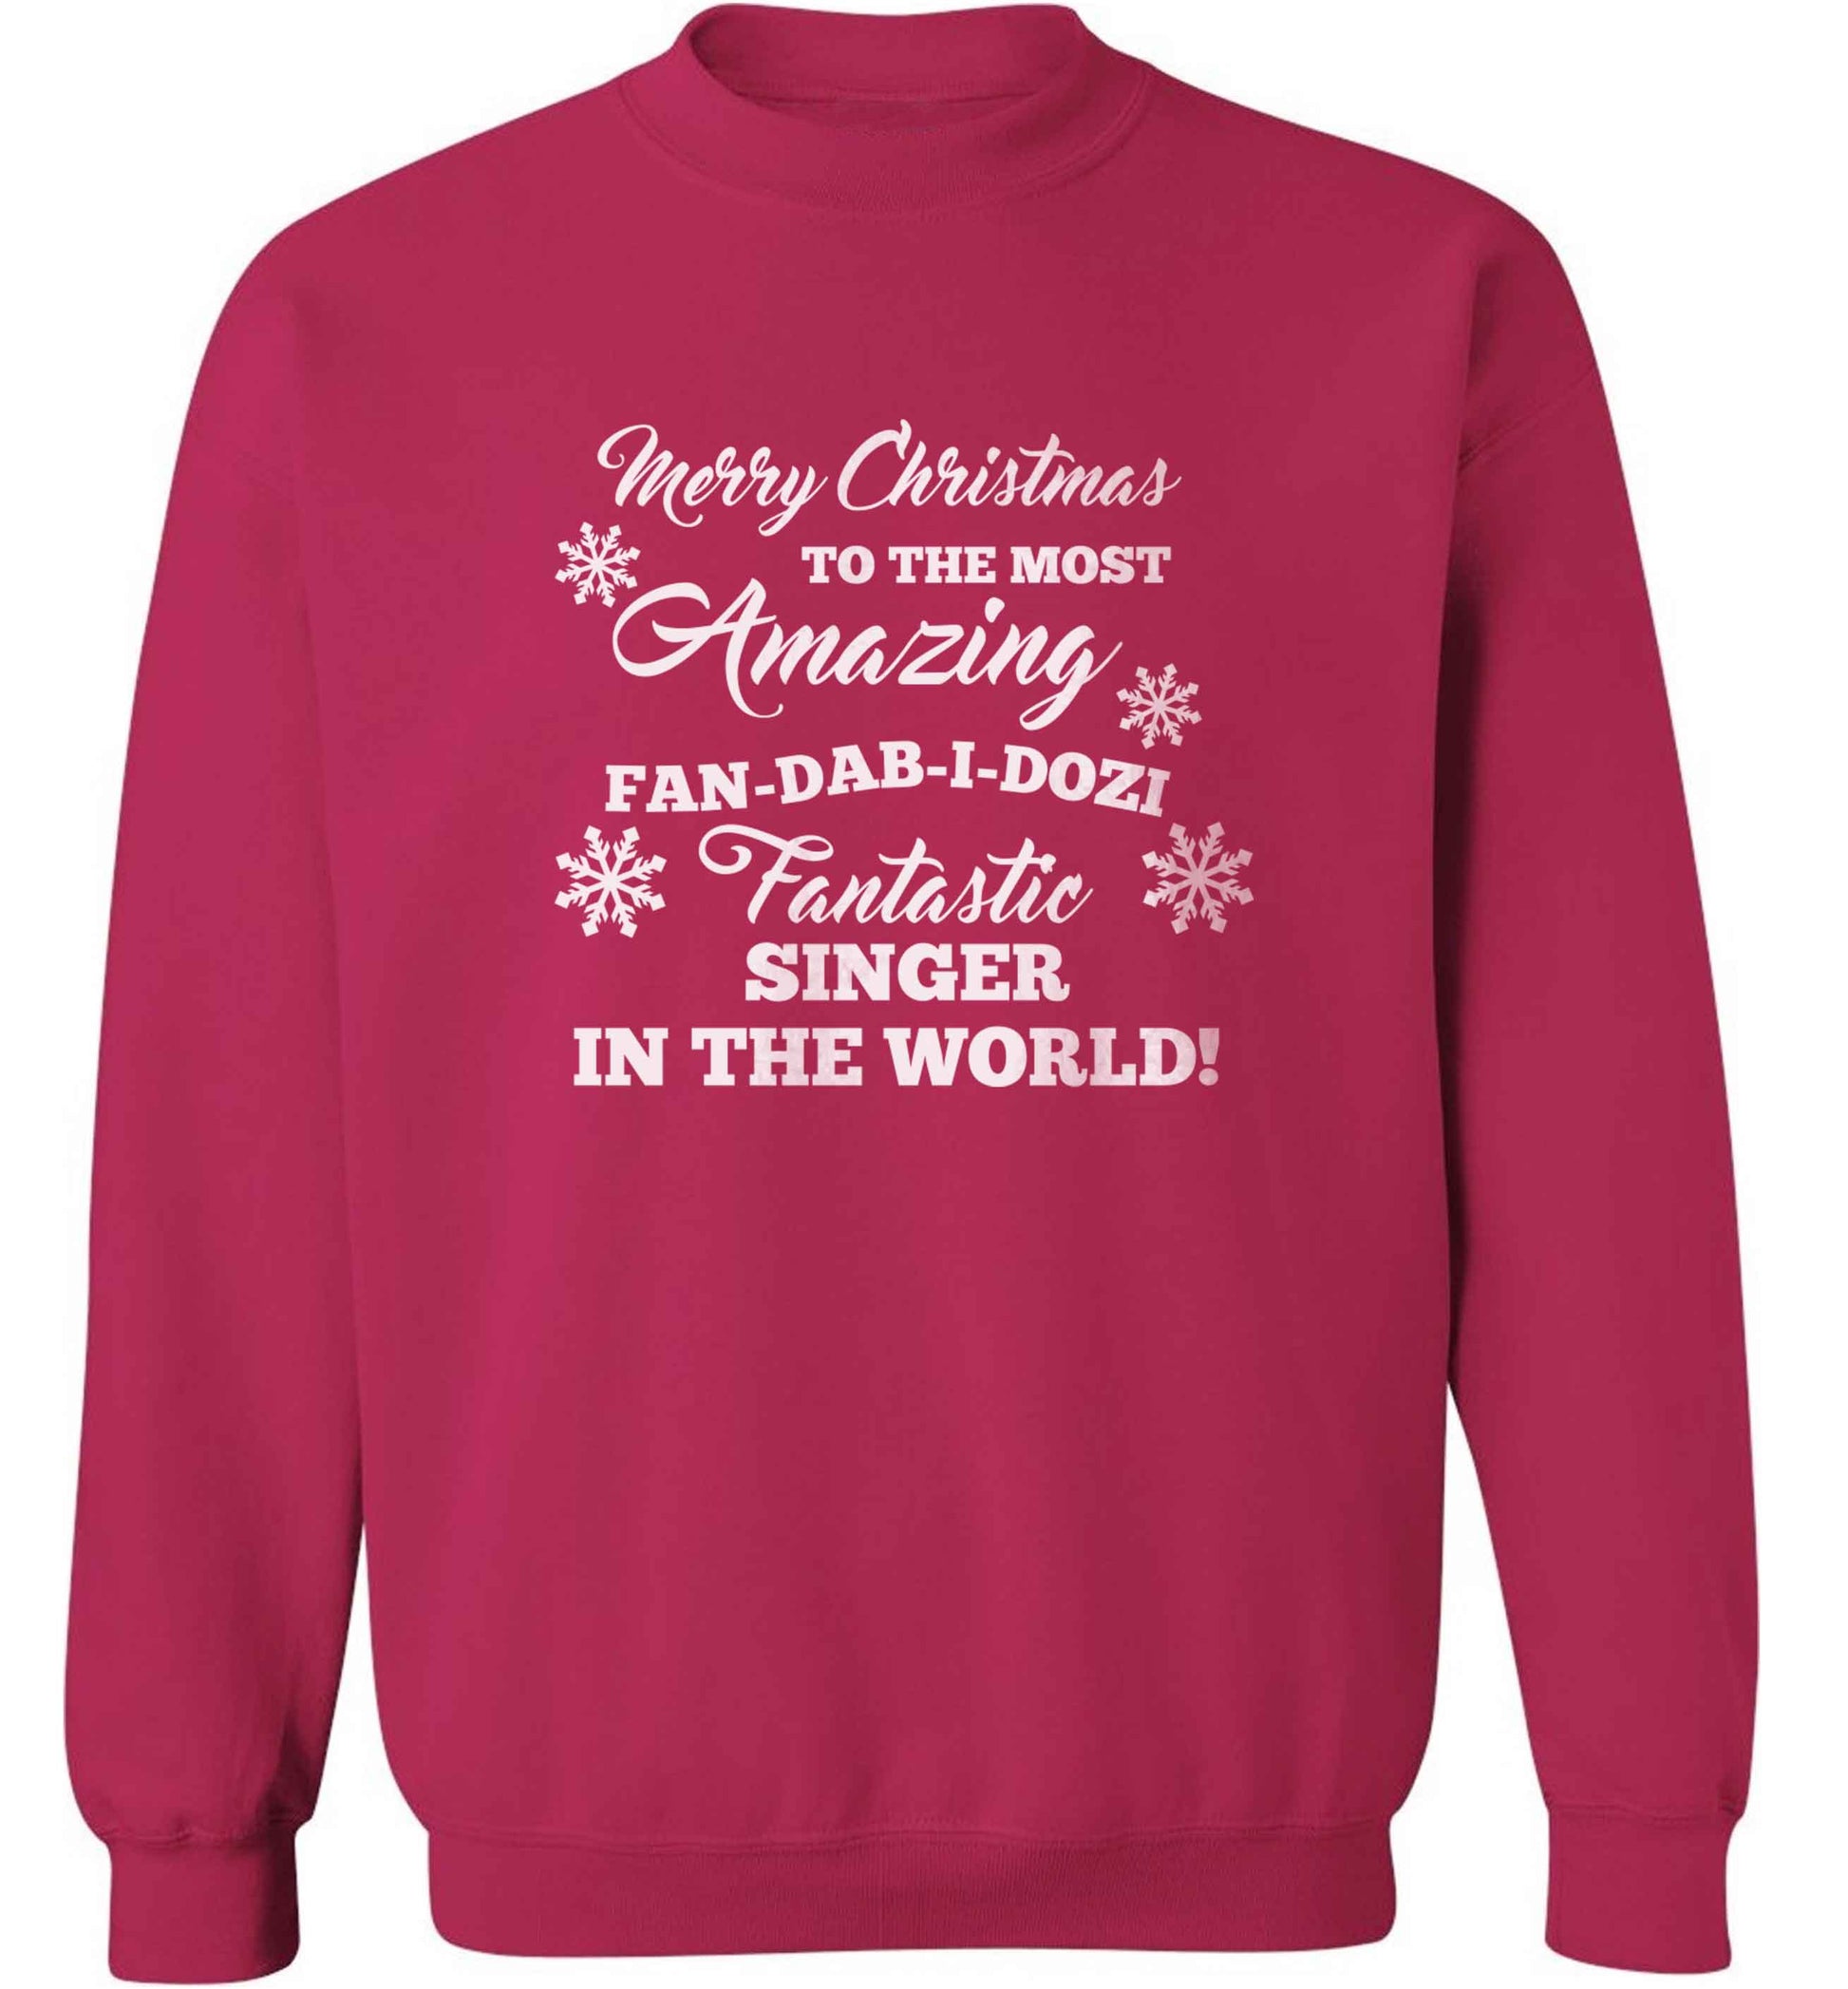 Merry Christmas to the most amazing singer in the world! adult's unisex pink sweater 2XL